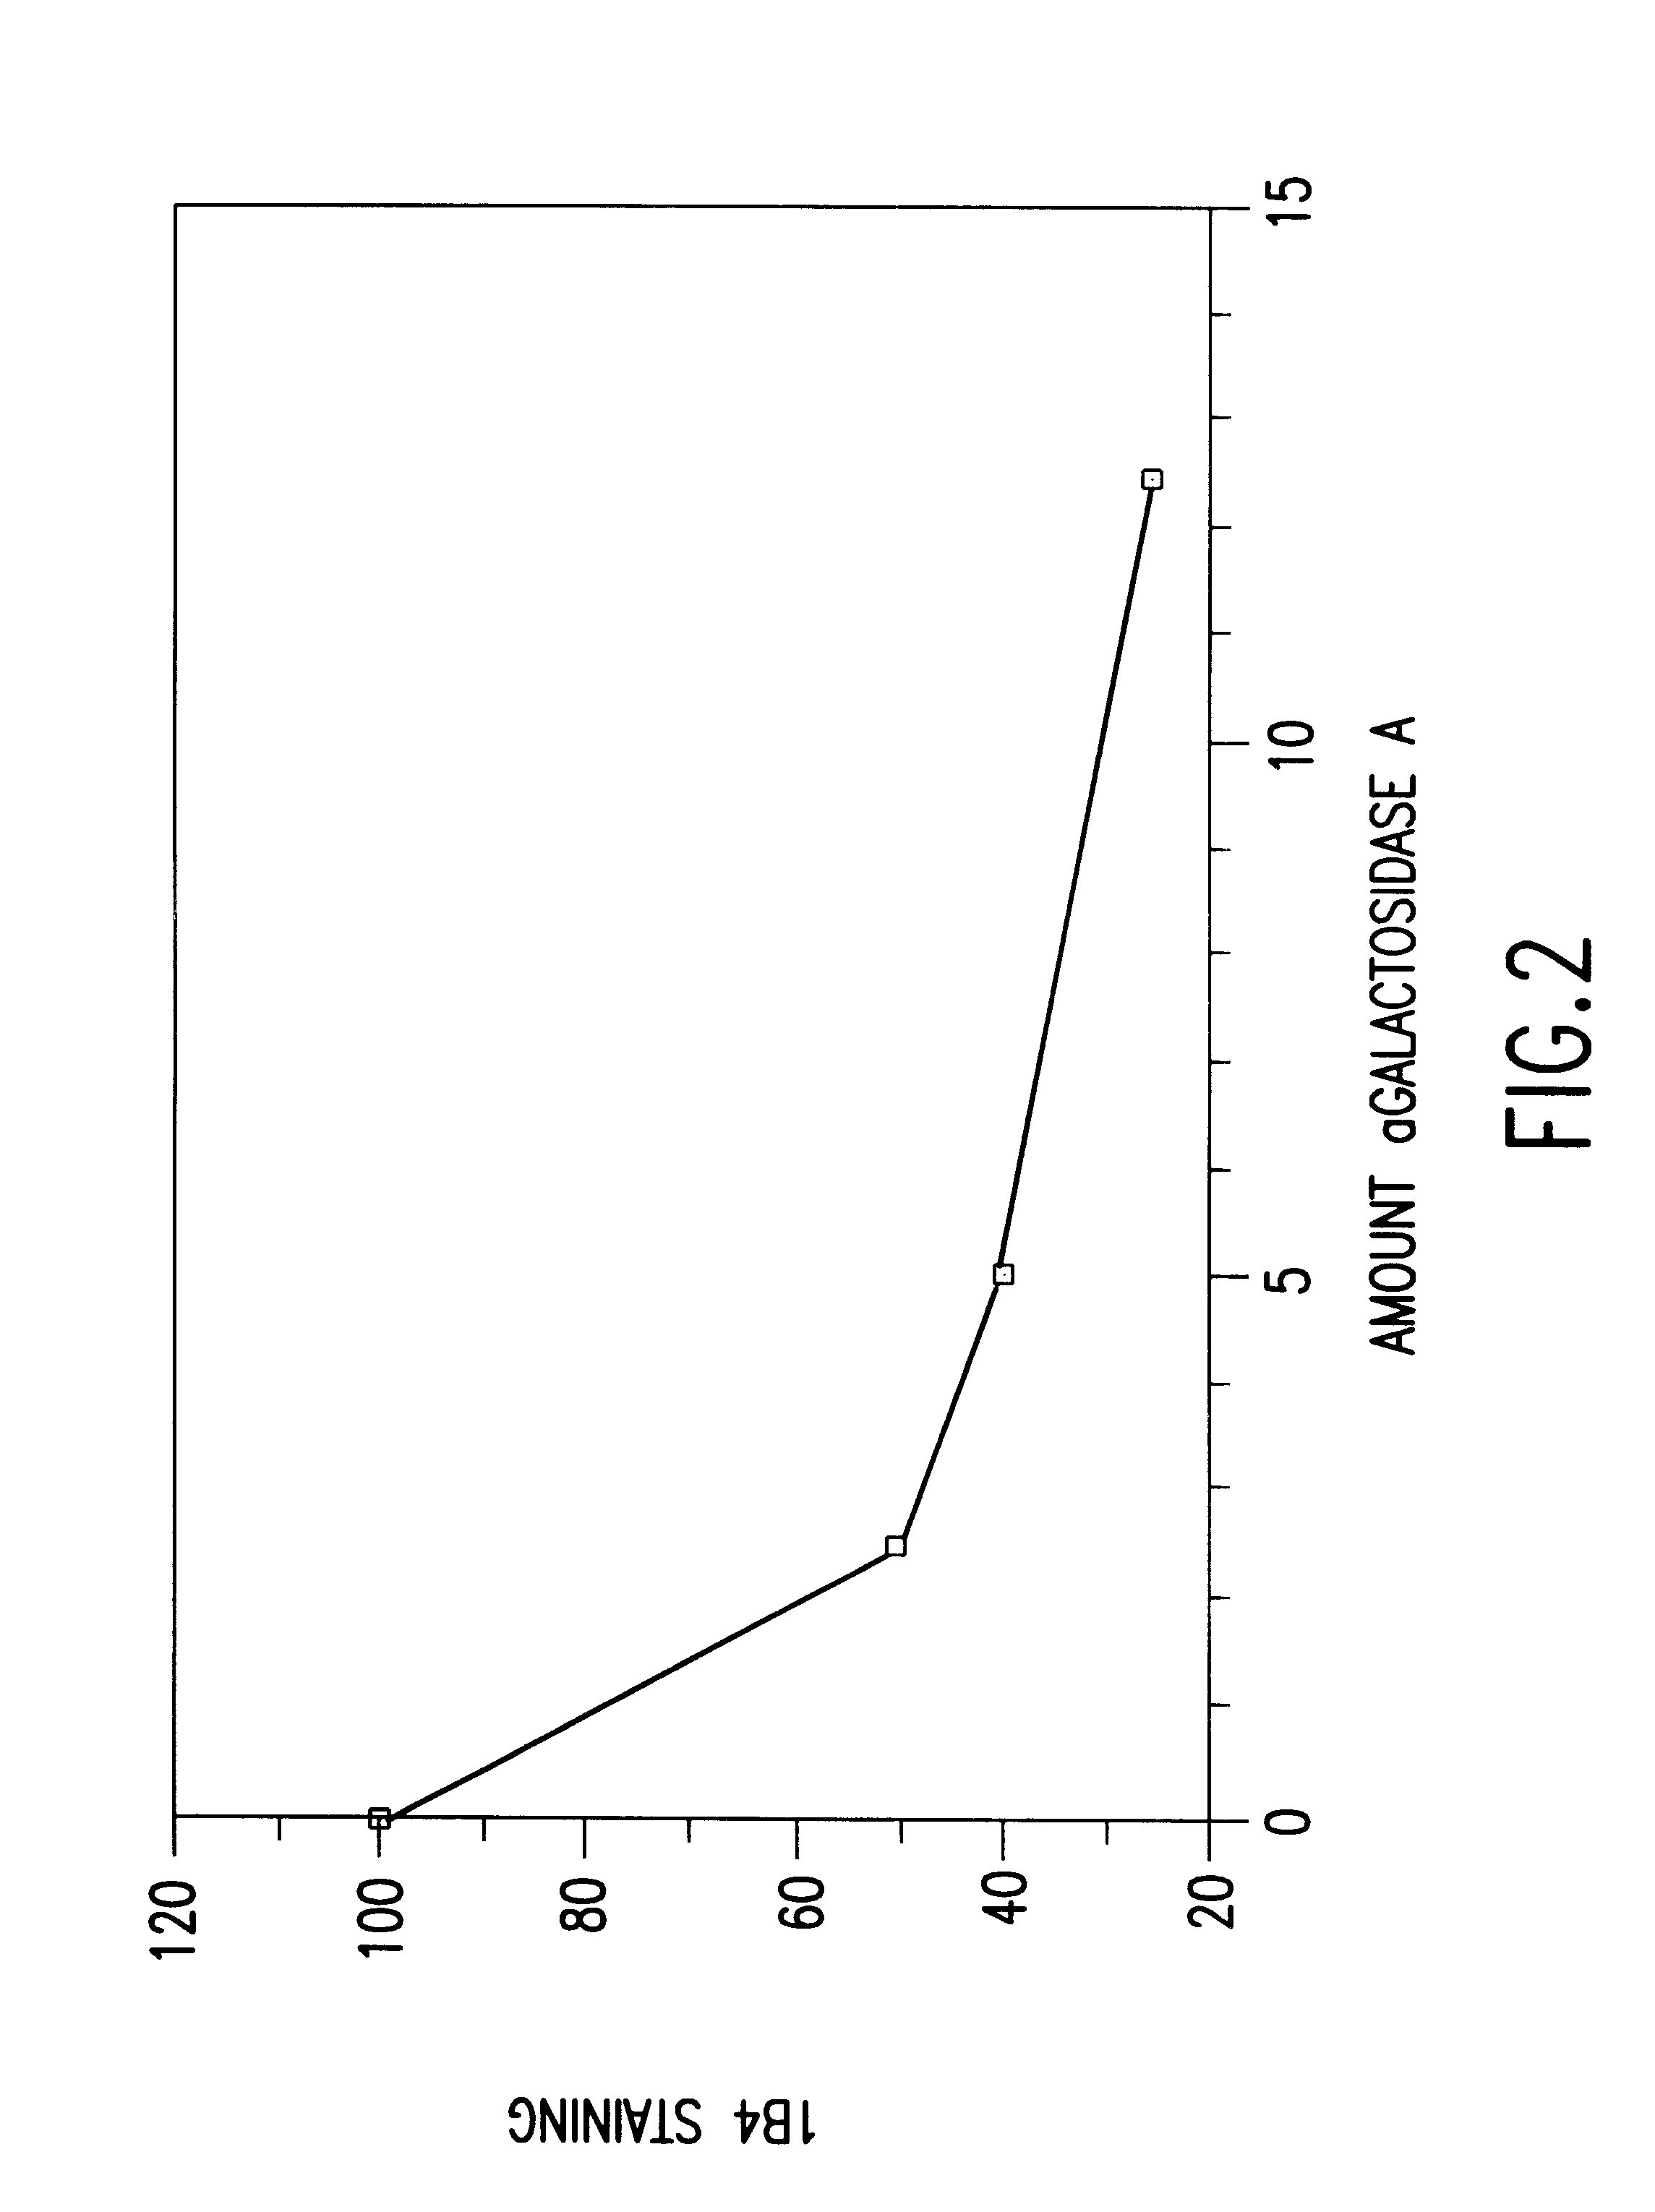 Cells expressing an alphagala nucleic acid and methods of xenotransplantation